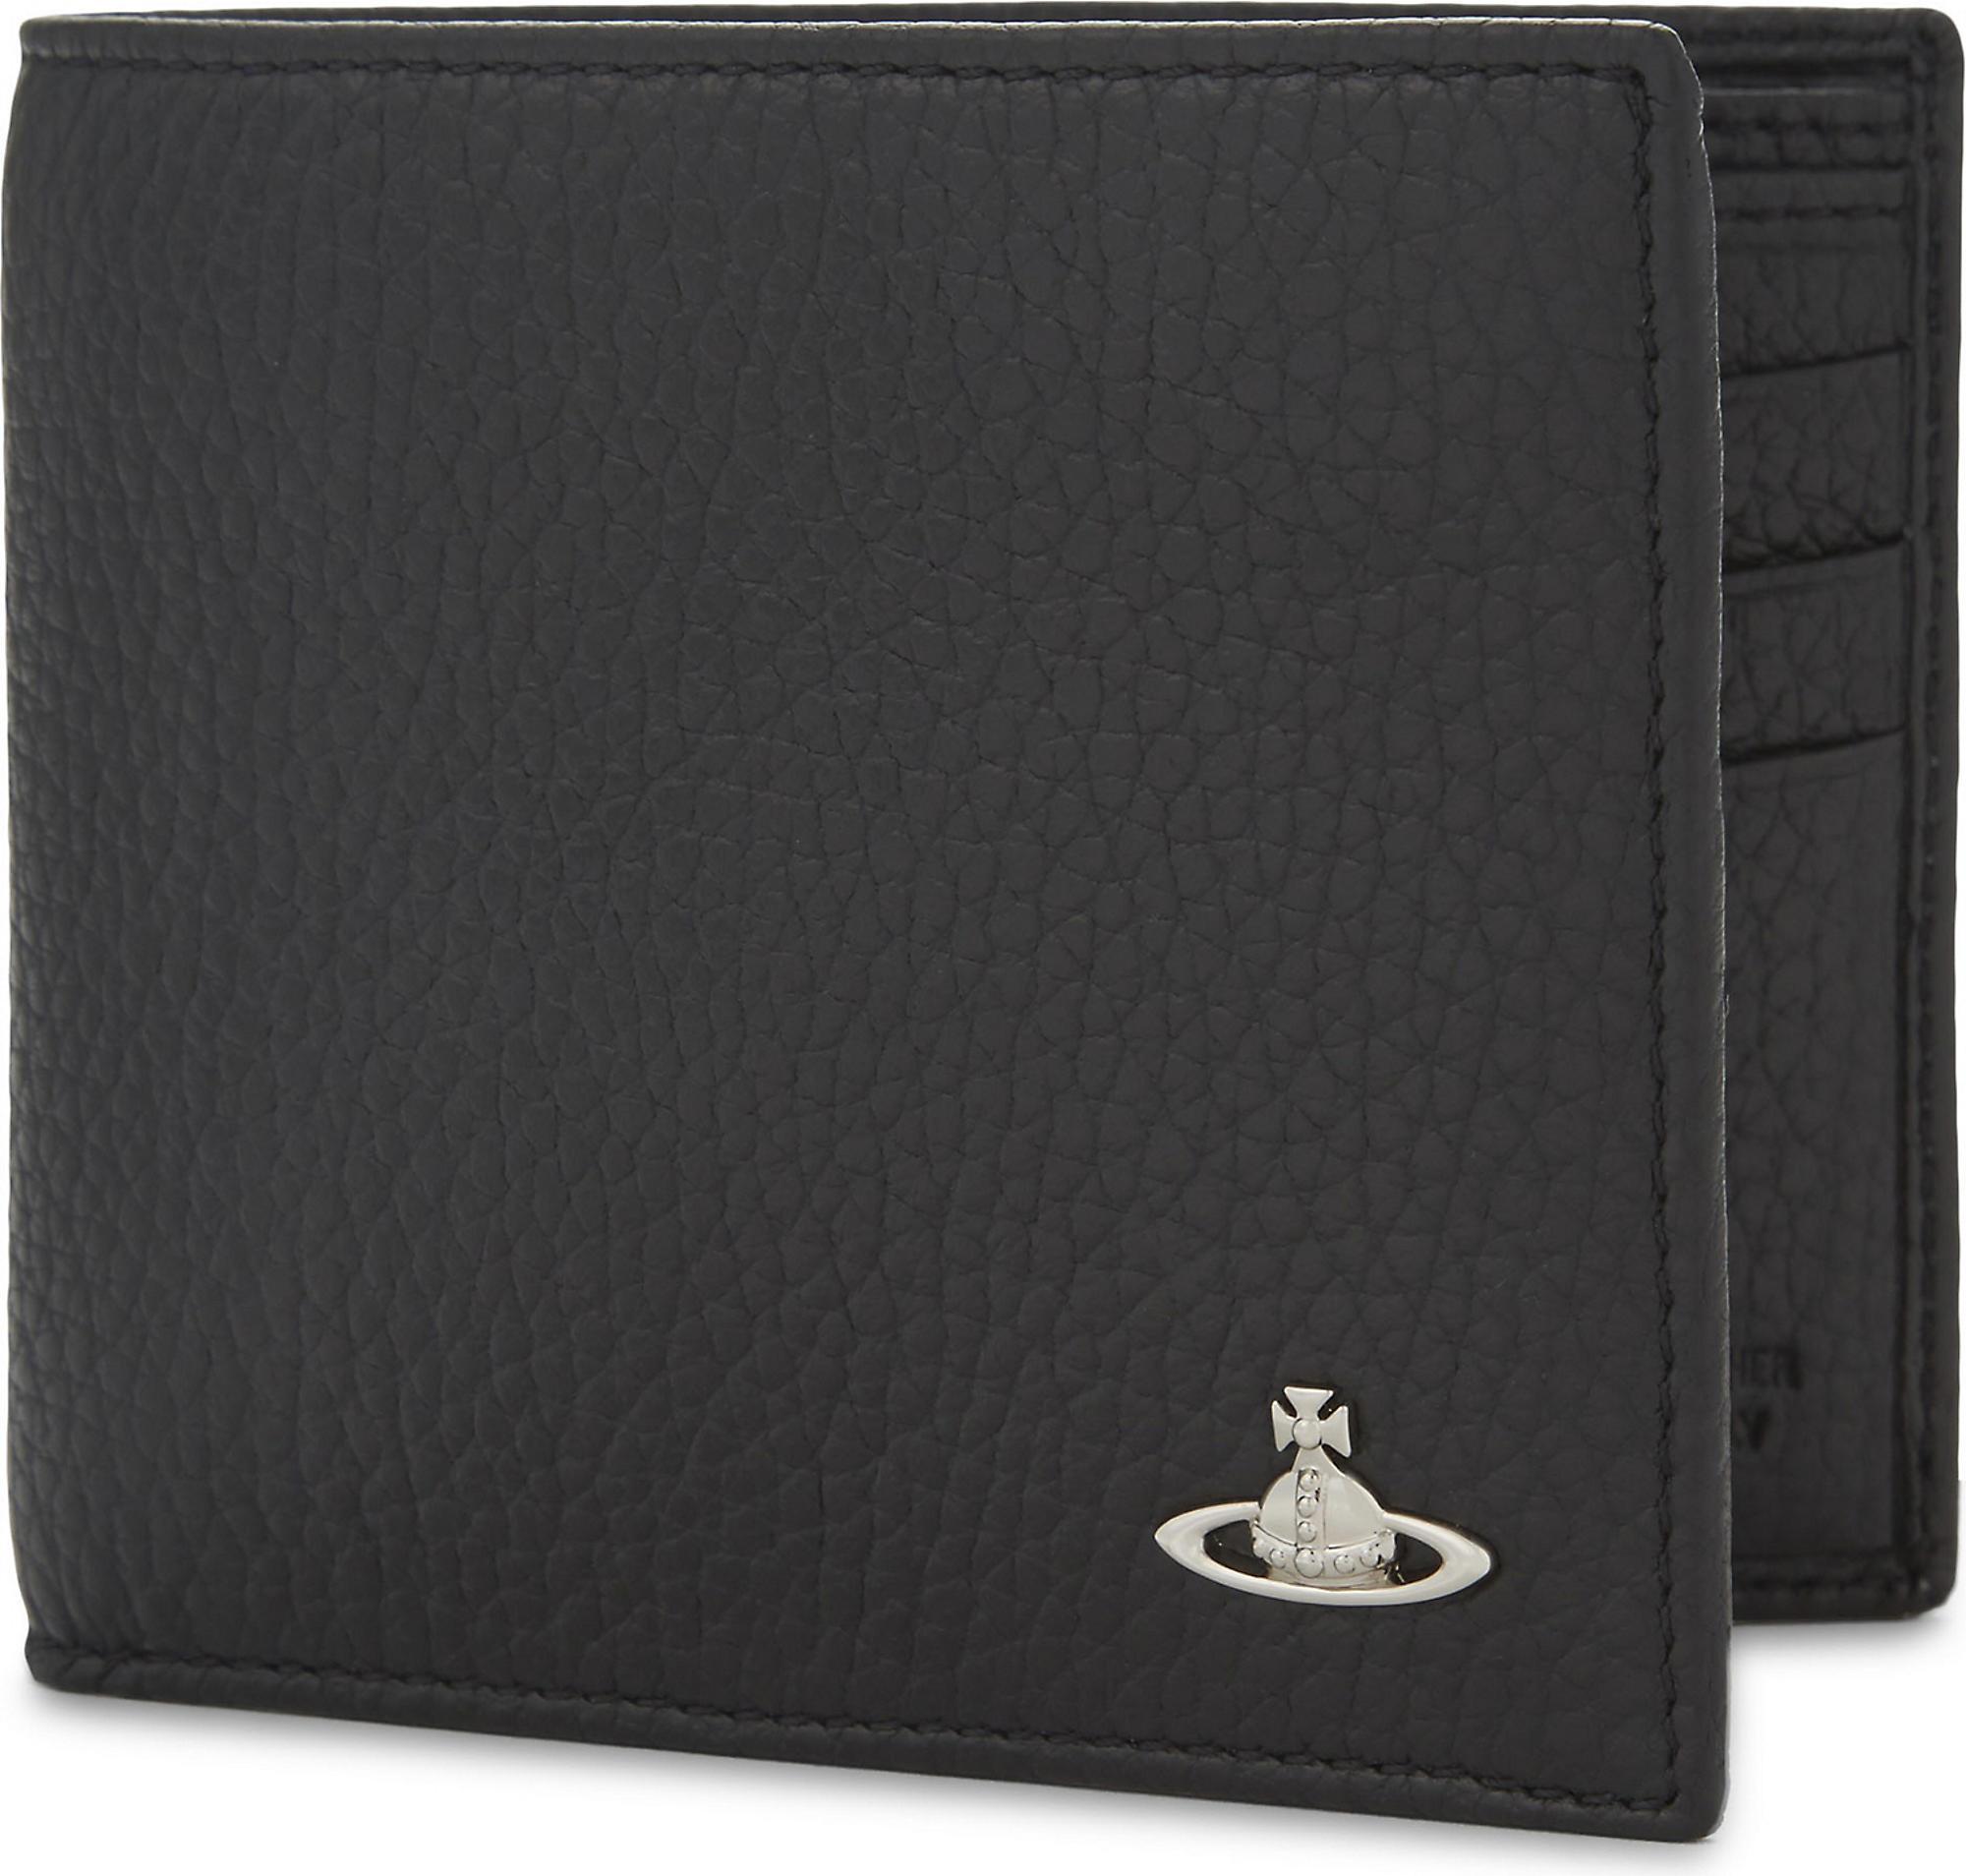 Vivienne Westwood Milano Grained Leather Billfold Wallet in Black for ...